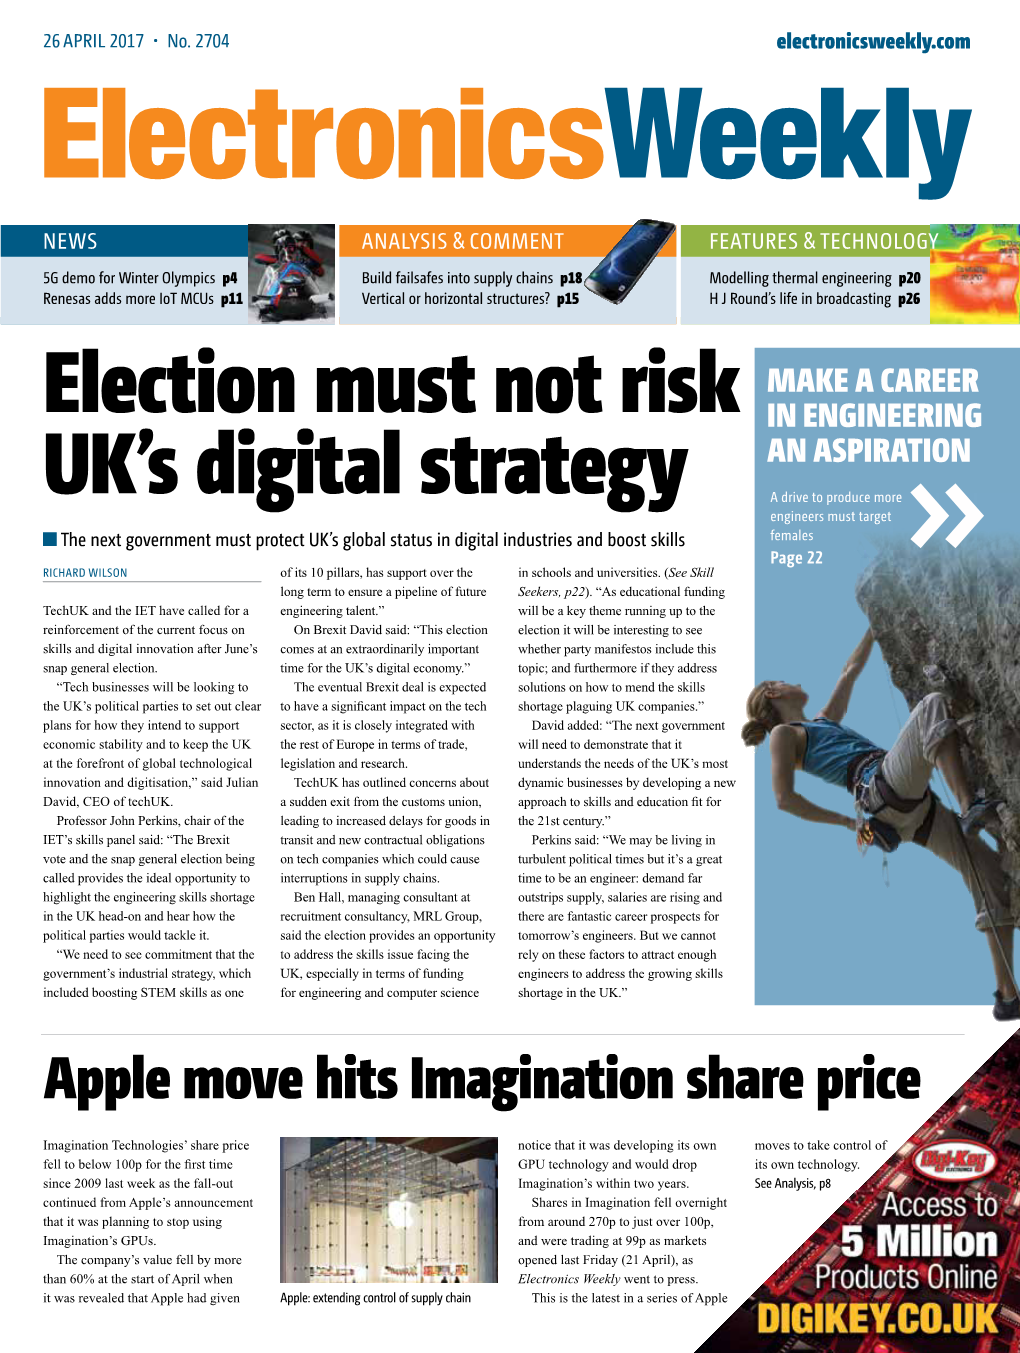 Election Must Not Risk UK's Digital Strategy